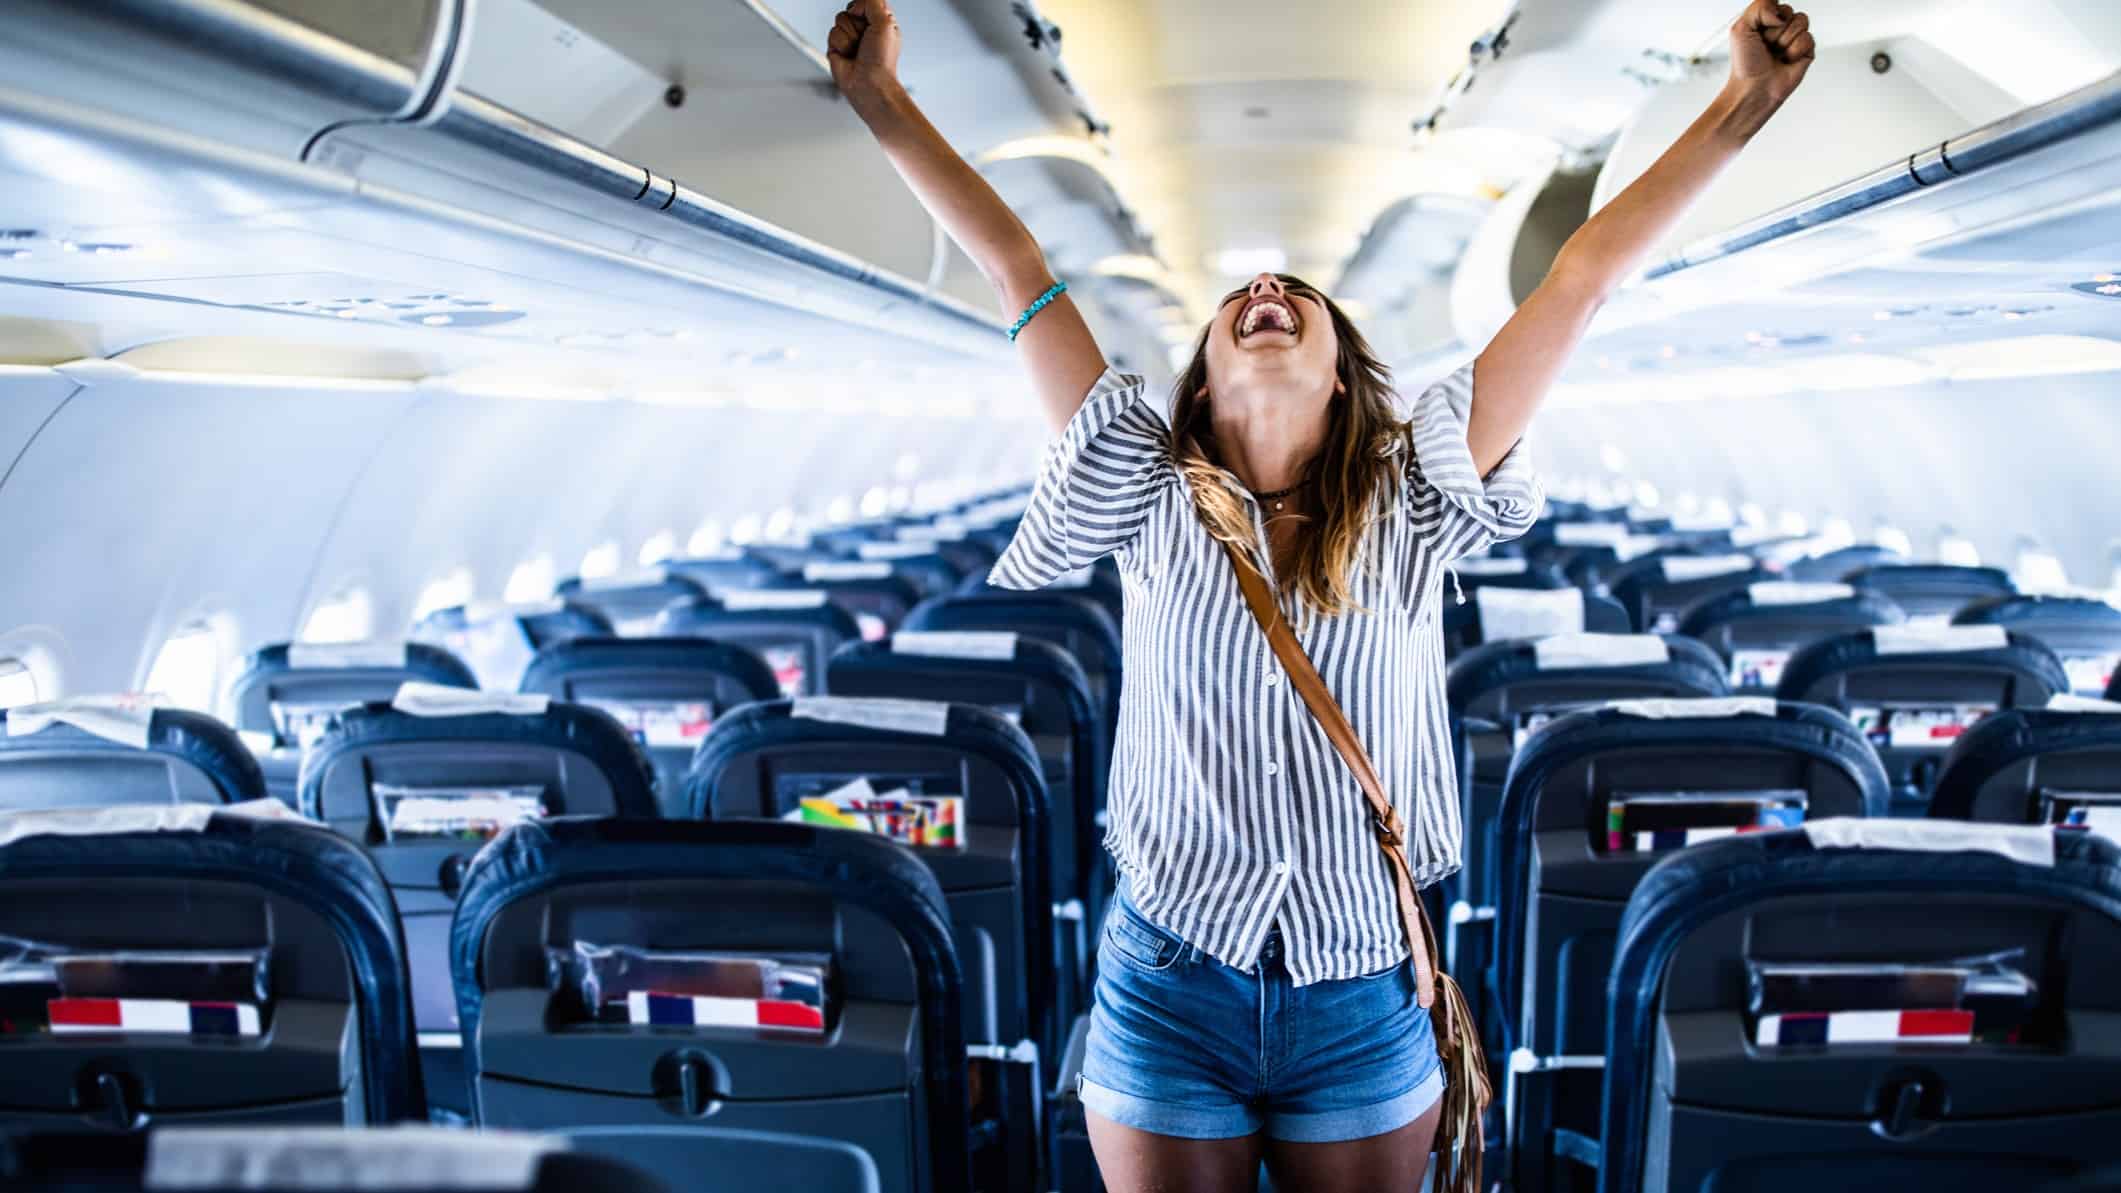 A woman on holiday stands with her arms outstretched joyously in an aeroplane cabin.